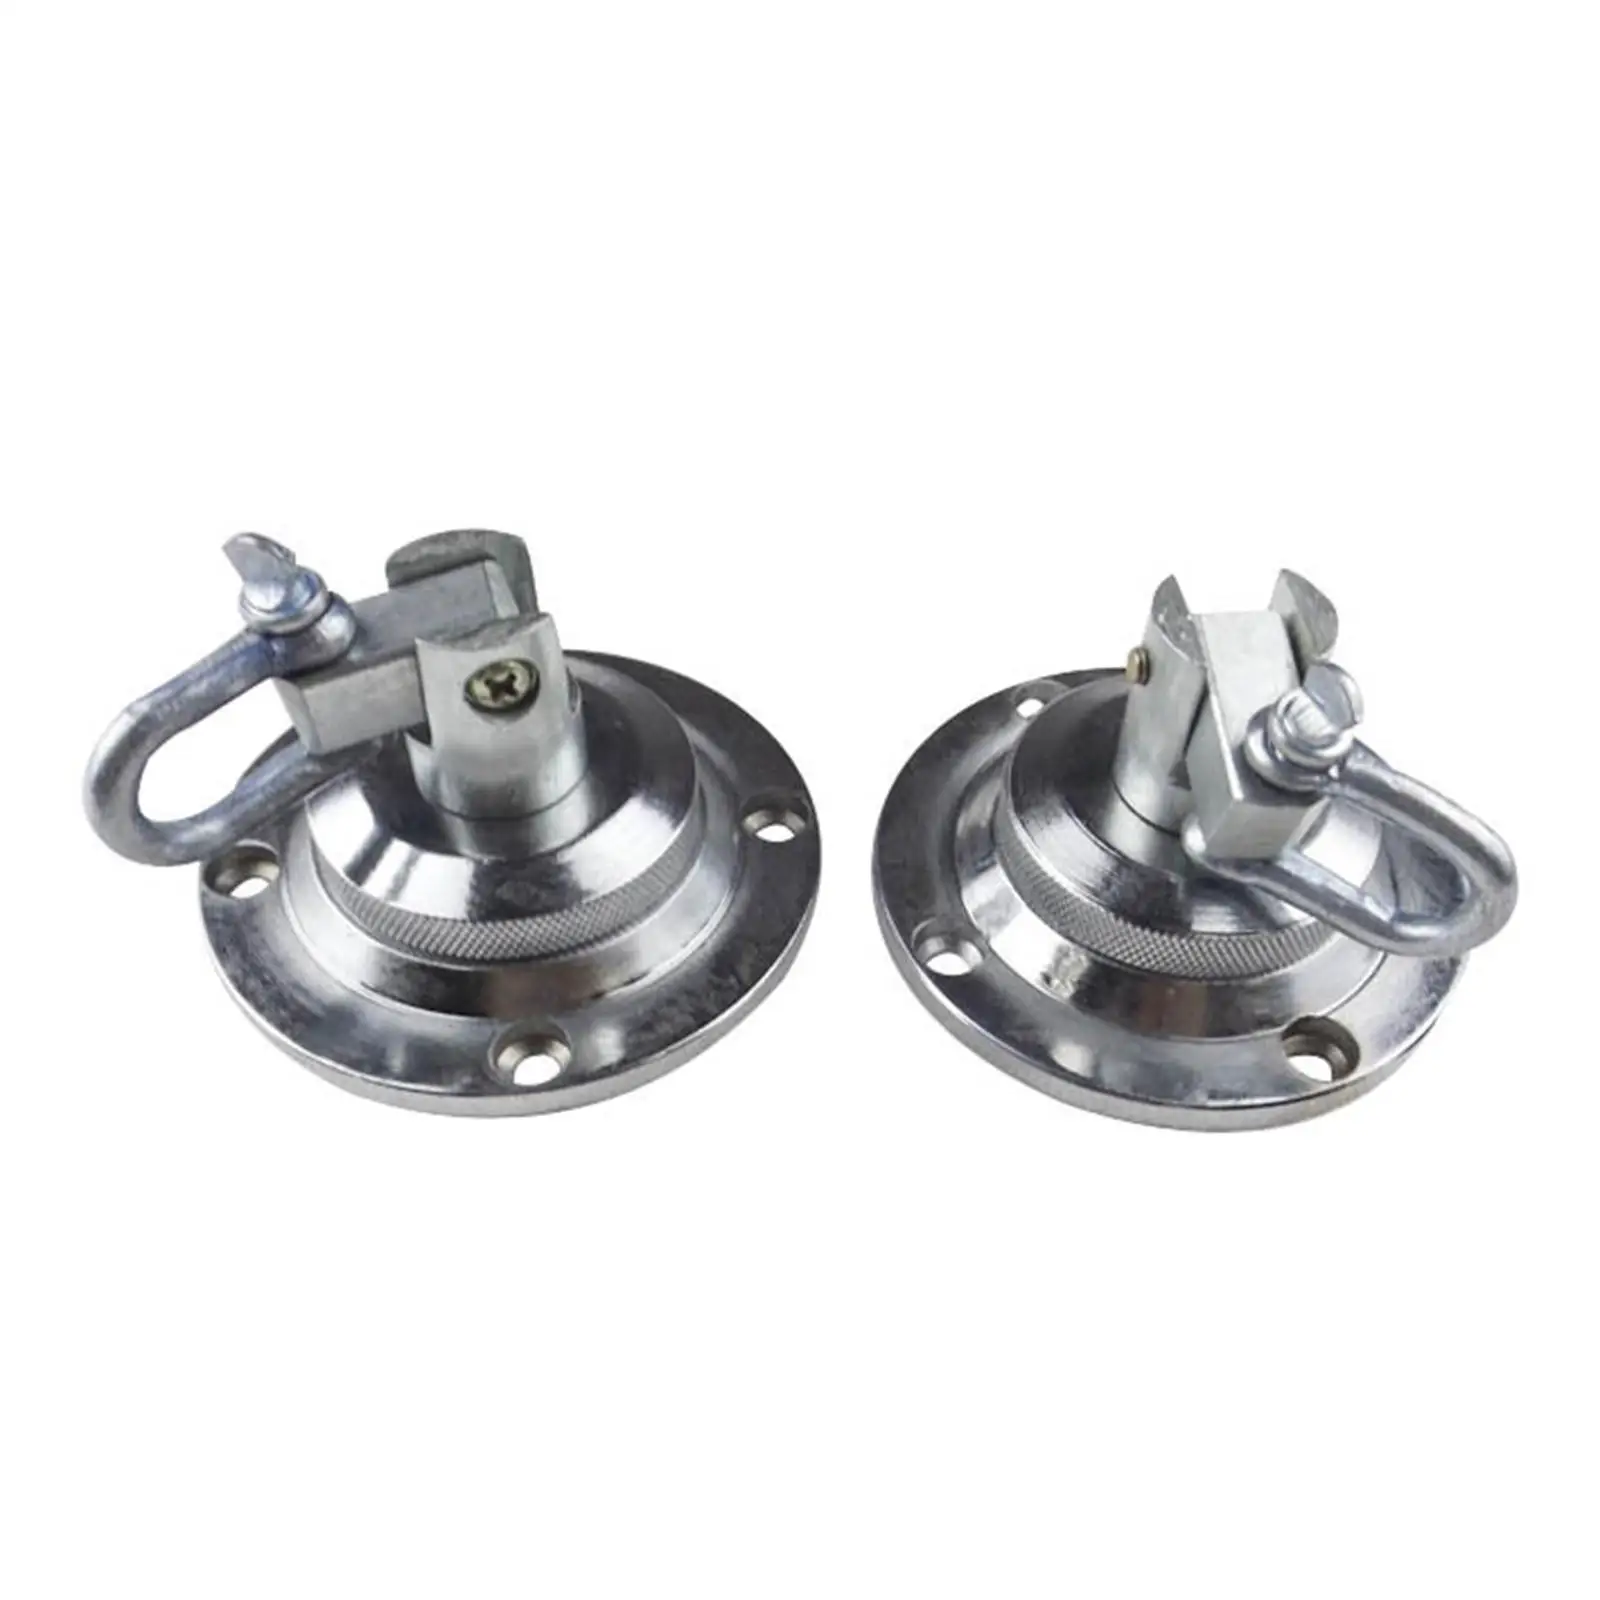 Speed Ball Swivel Pear Ball Parts Ceiling Mount Multipurpose for 